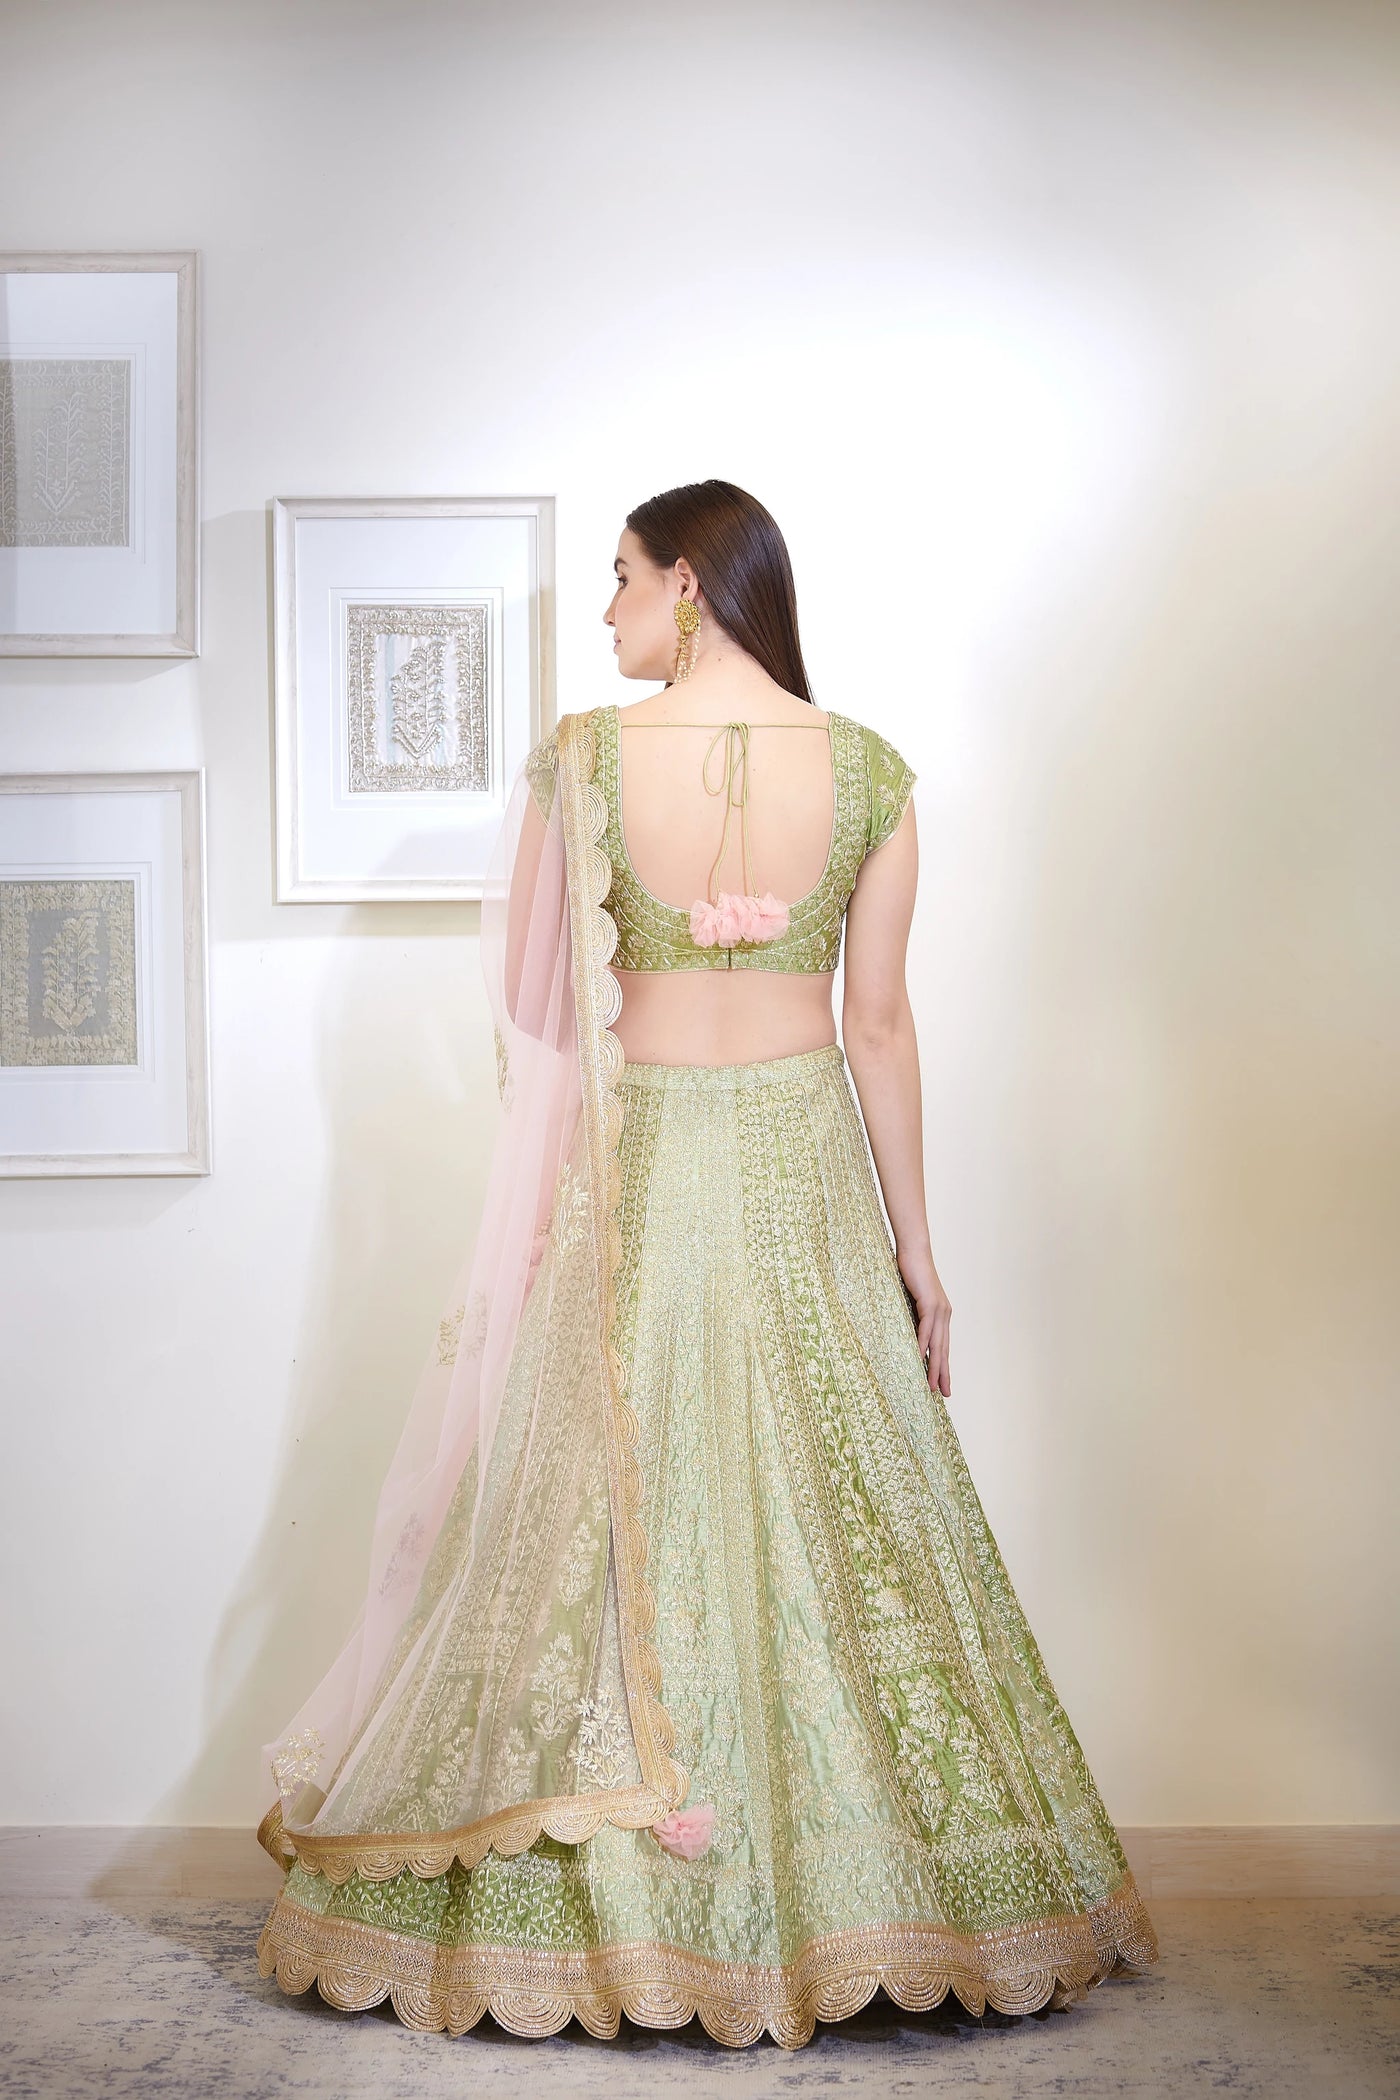 Green Embroidered Lehenga Indian Clothing in Denver, CO, Aurora, CO, Boulder, CO, Fort Collins, CO, Colorado Springs, CO, Parker, CO, Highlands Ranch, CO, Cherry Creek, CO, Centennial, CO, and Longmont, CO. NATIONWIDE SHIPPING USA- India Fashion X